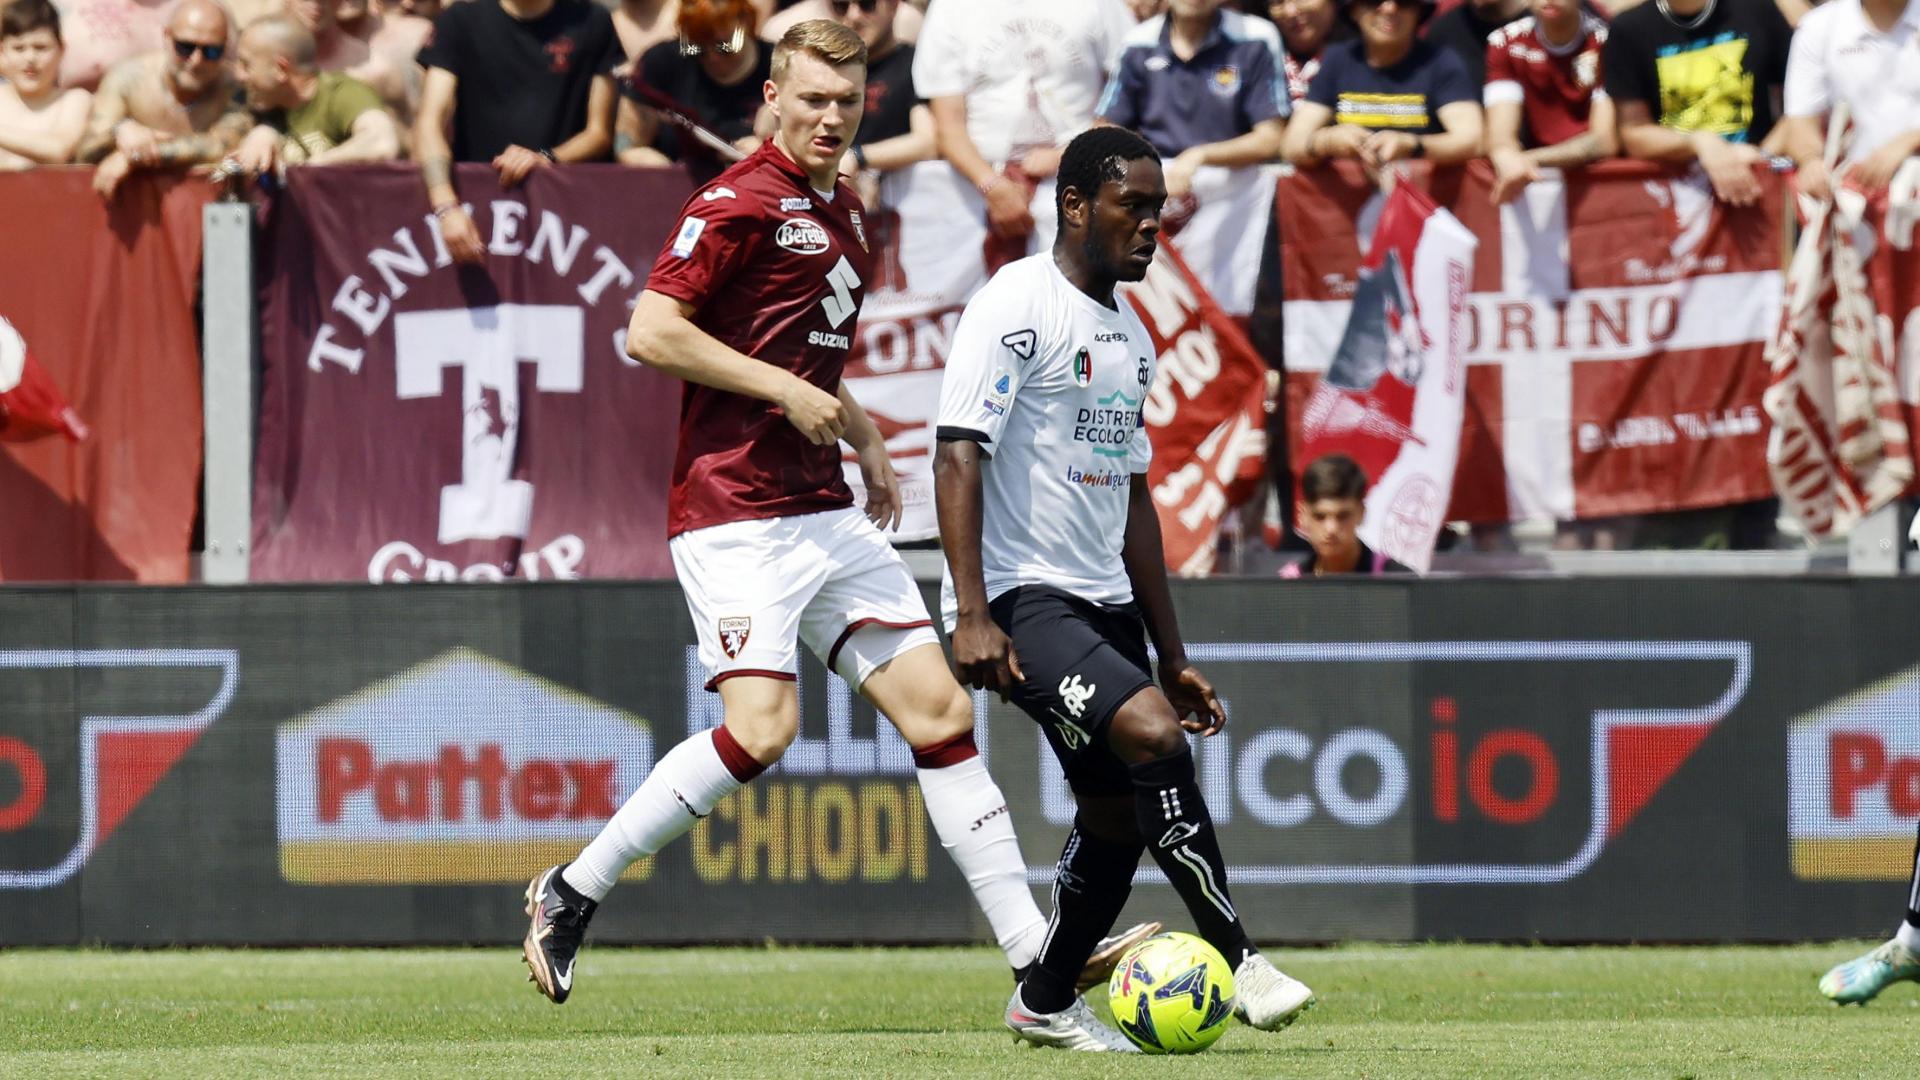 Gyasi: "We are not dead, we will go to Rome and fight until the end"